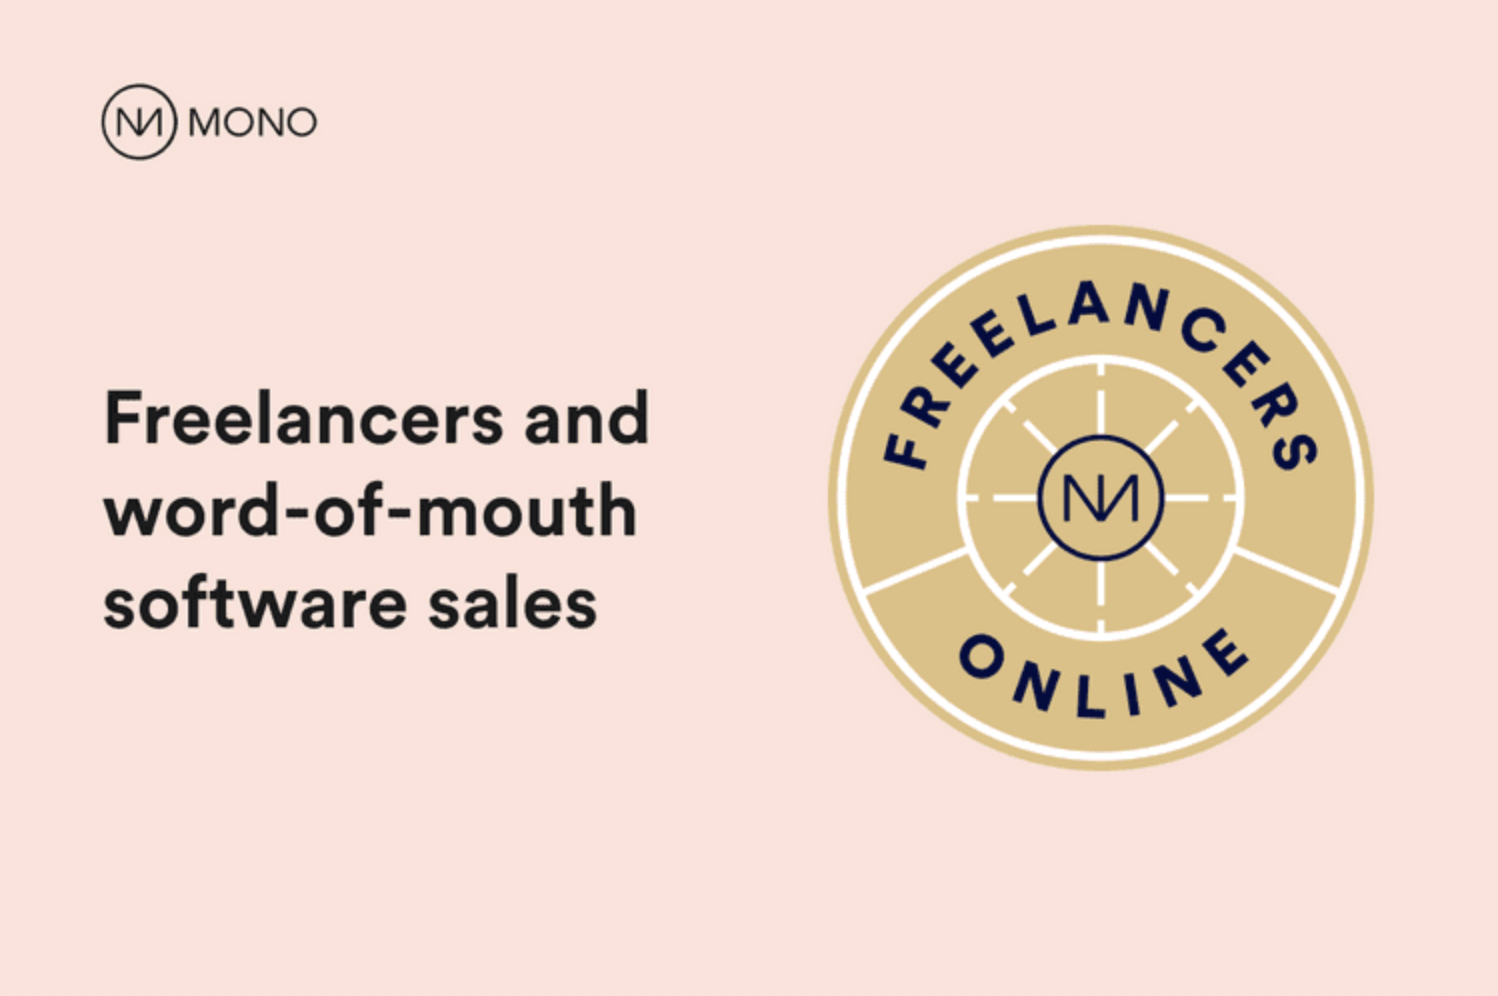 Freelancers_and_word-of-mouth_software_sales_-_mono_blog.png